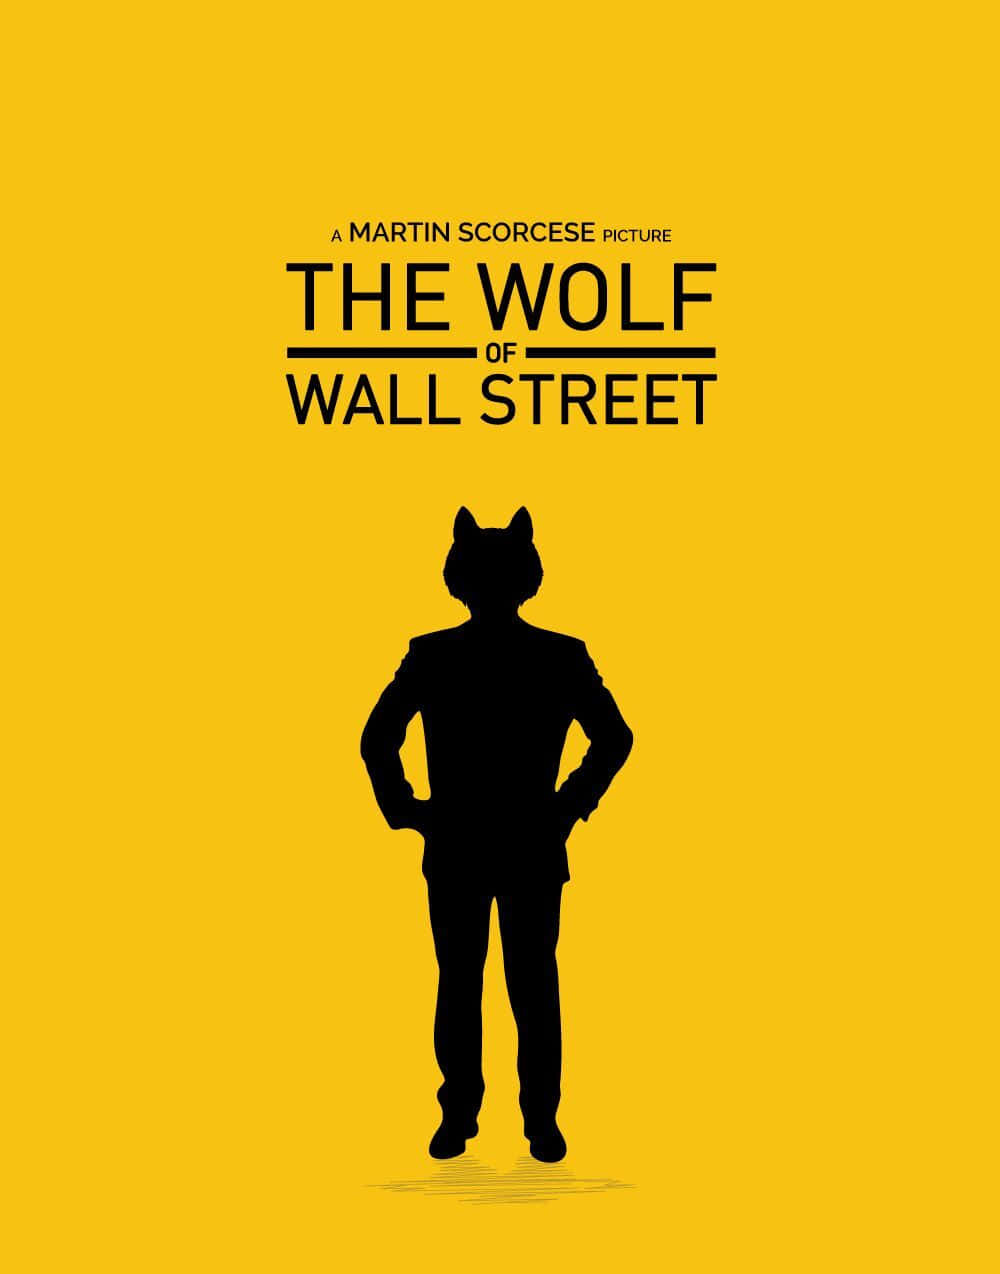 The Wolf of Wall Street - Leonardo DiCaprio in a defining scene